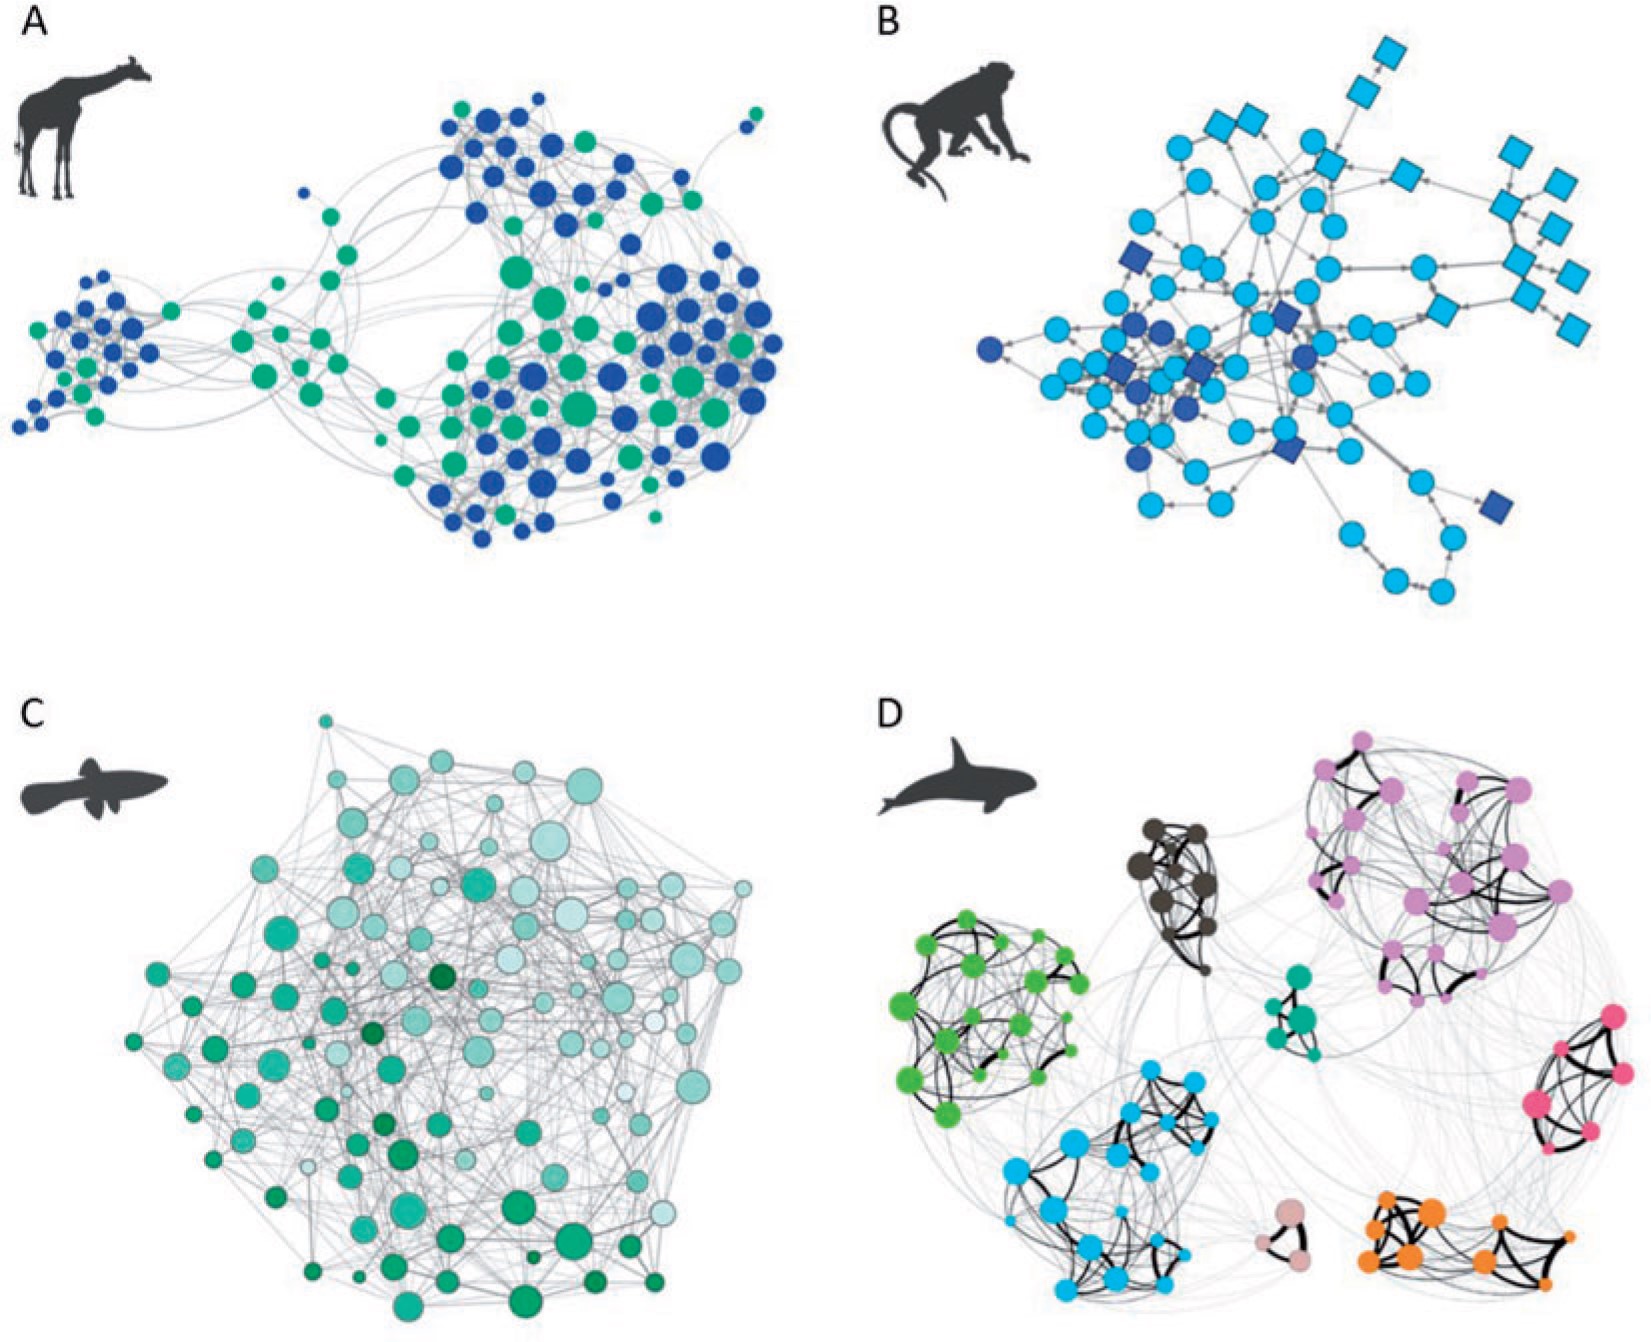 Shown are four different animals, with coloured representations of their social networks next to them. The four animals are a giraffe, a rhesus macaques, a Trinidadian guppy, and an orca.